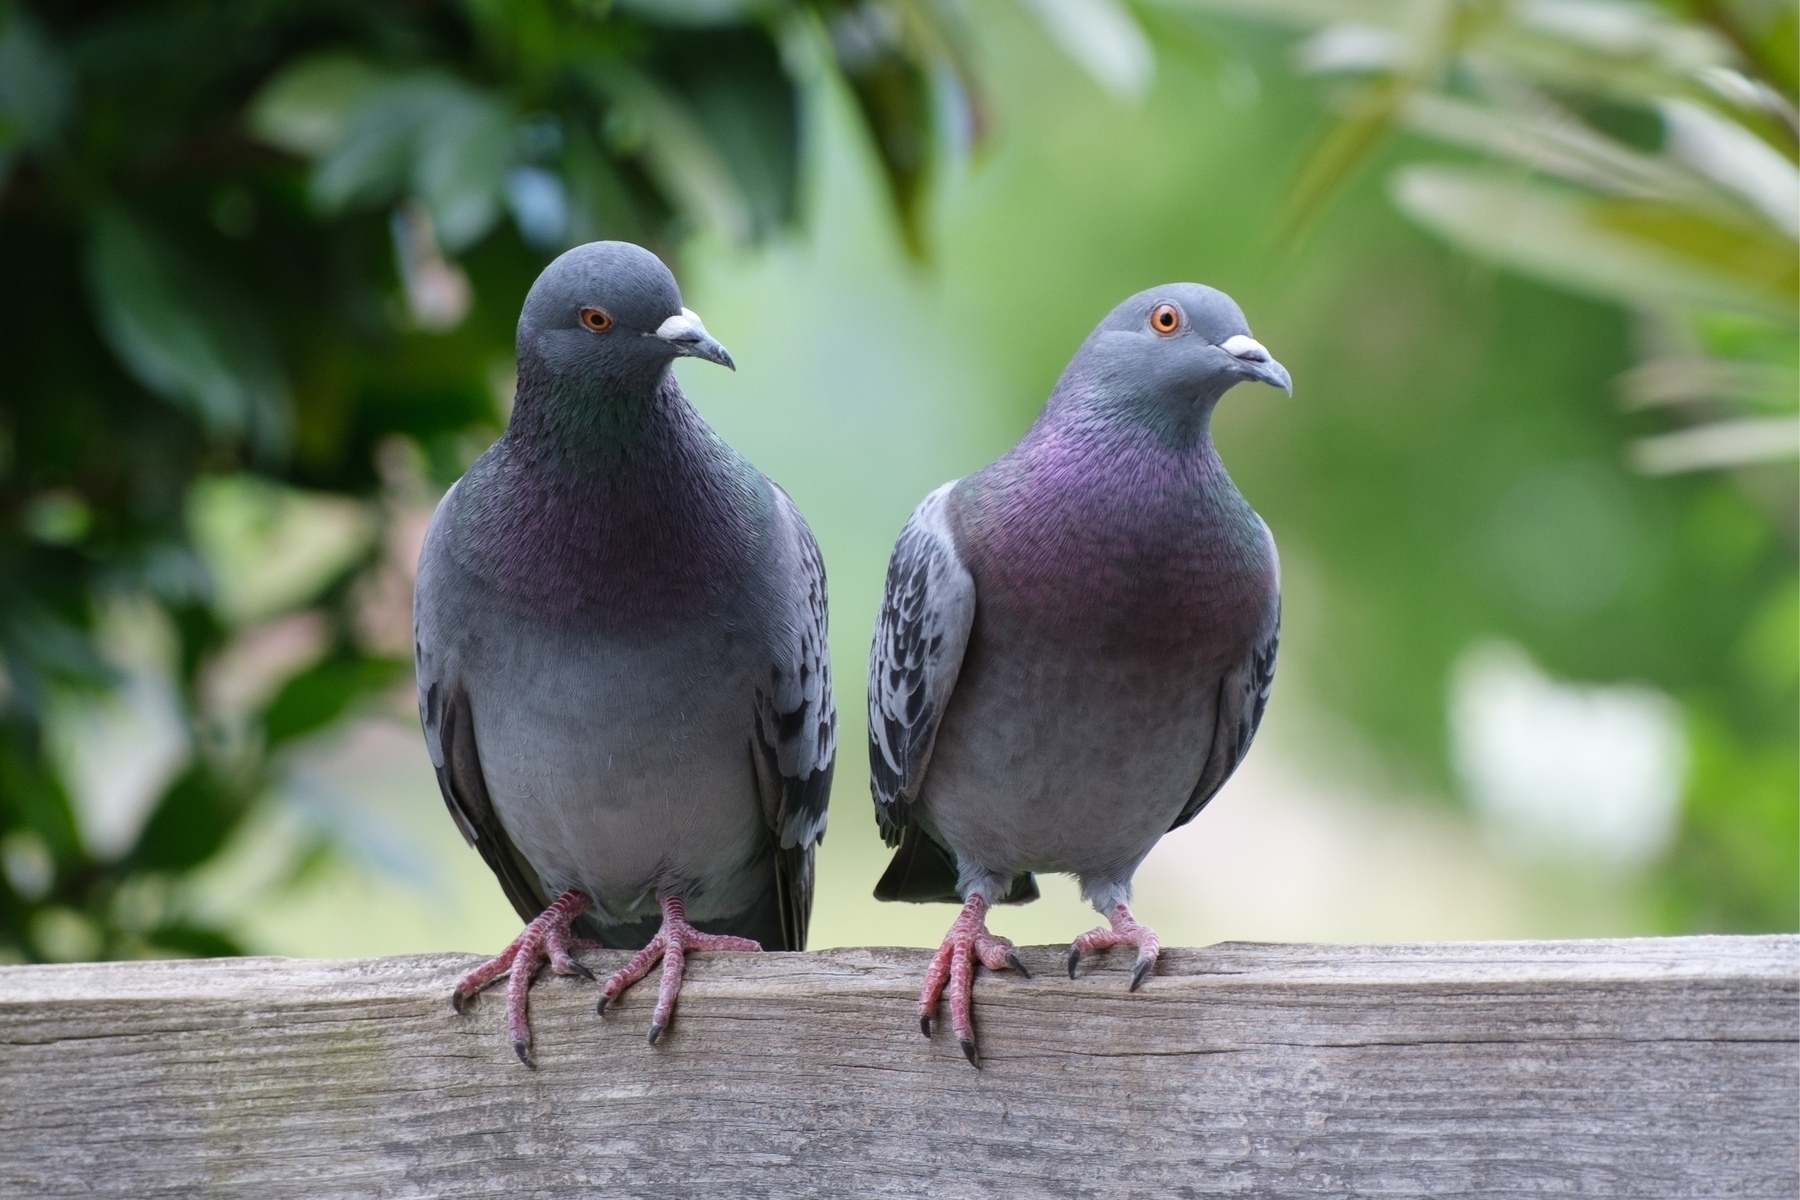 Two common pigeons sitting on a weathered wooden fence looking to the right. The background is blurred greenery.